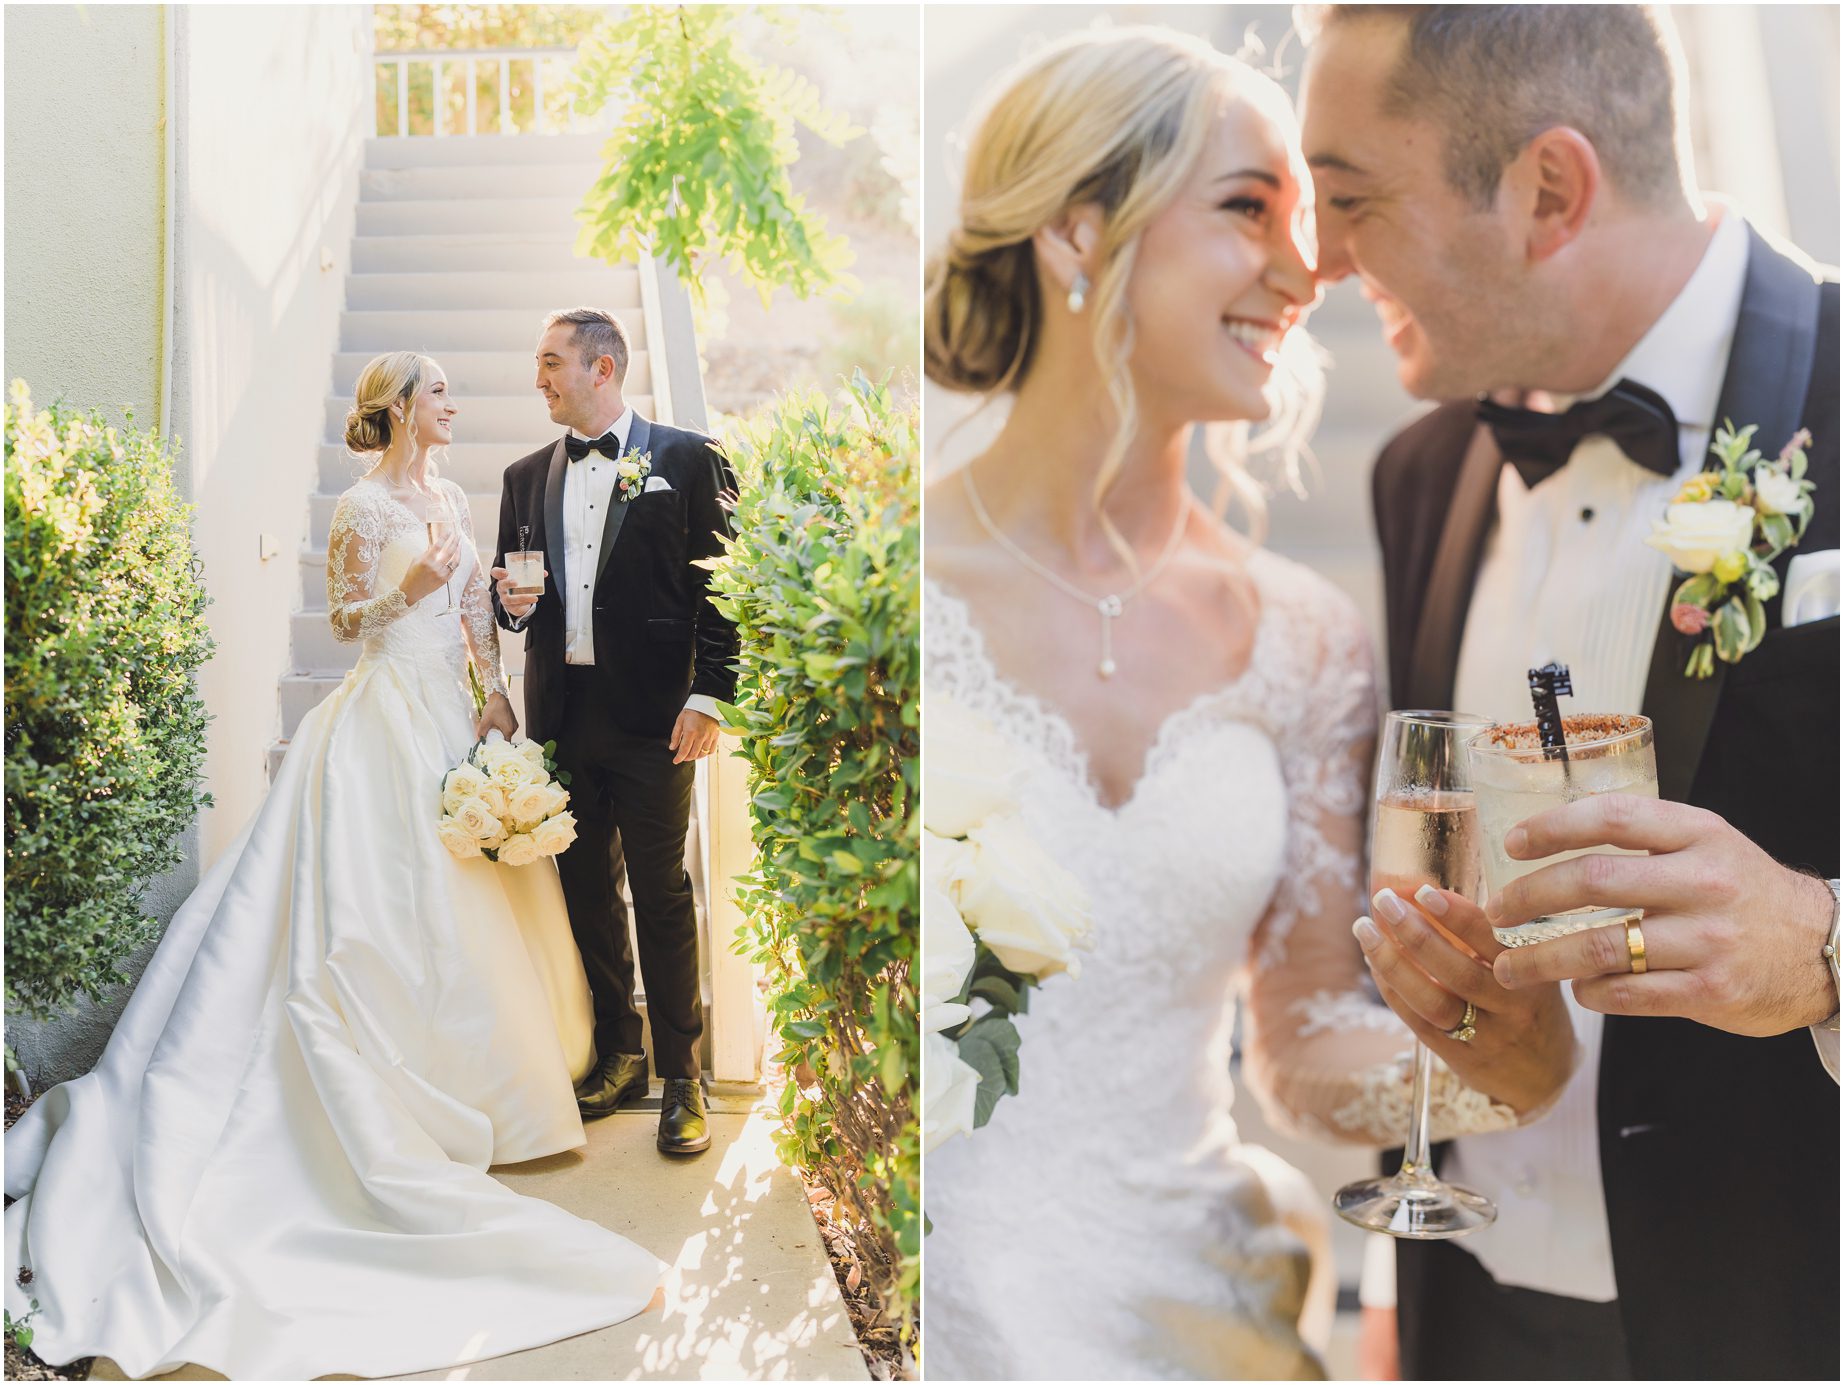 During golden hour, a bride and groom share a signature cocktail at their wedding in Southern California